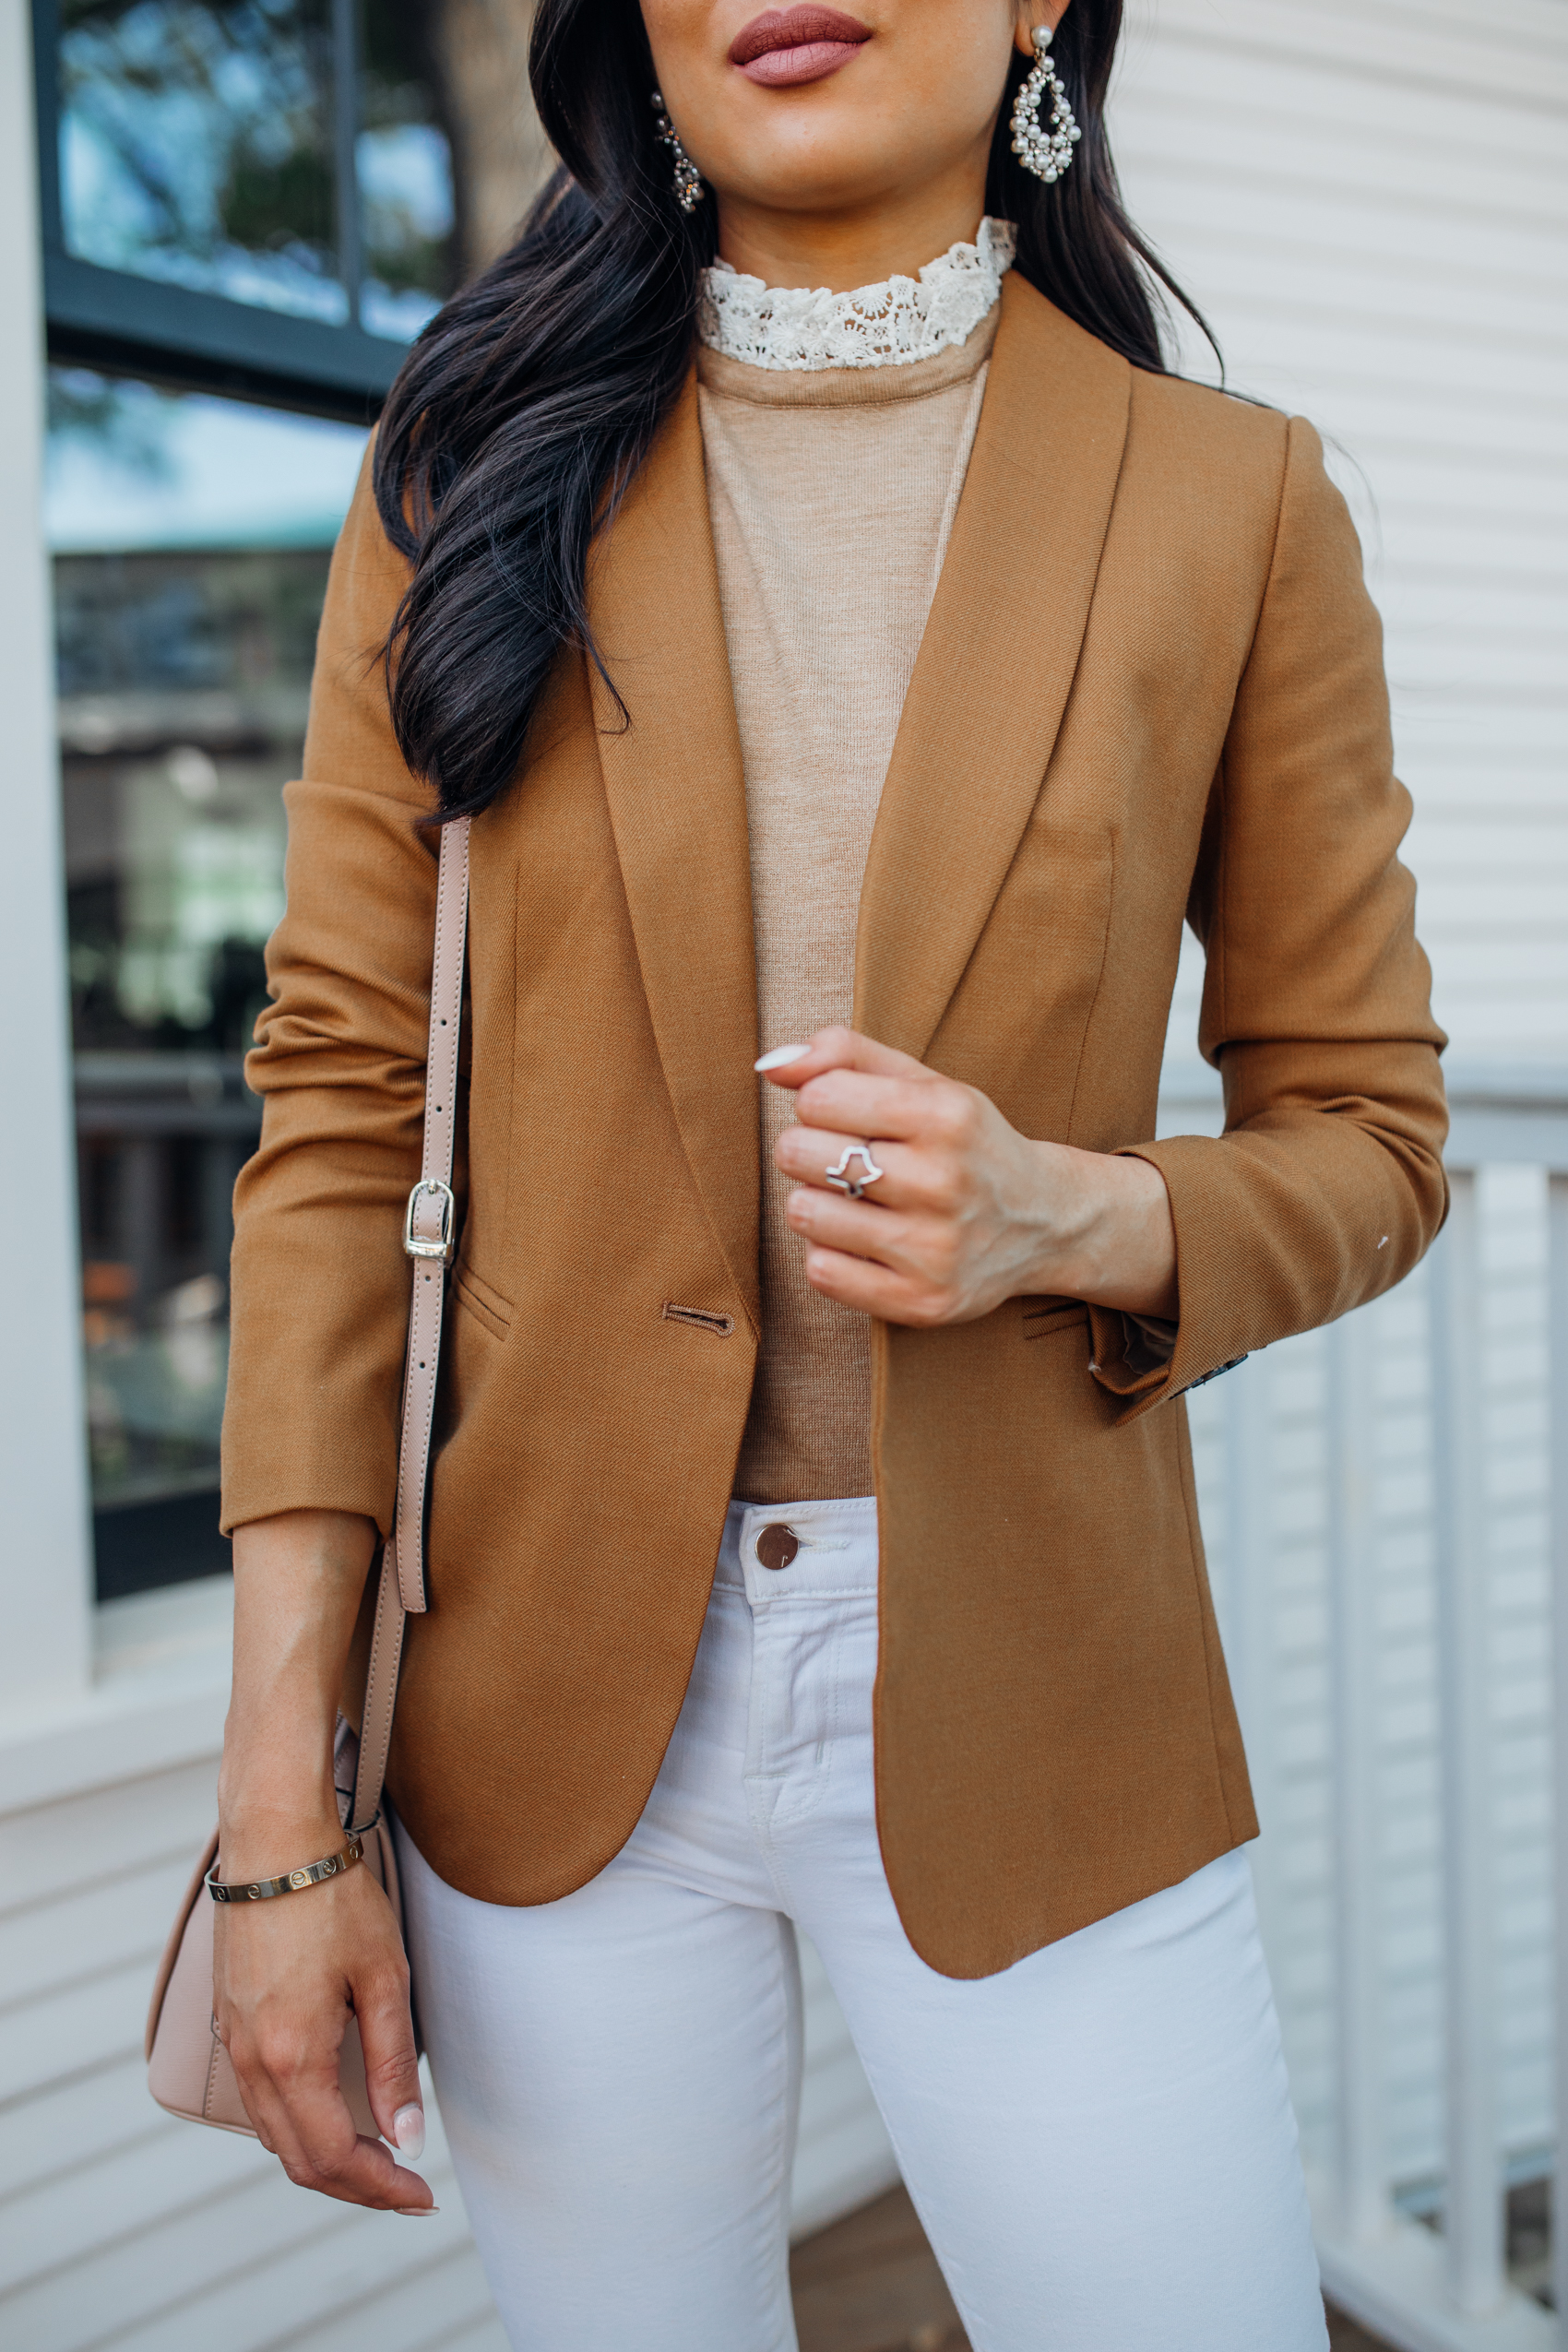 Brown blazer outfit for petite women and office appropriate workwear